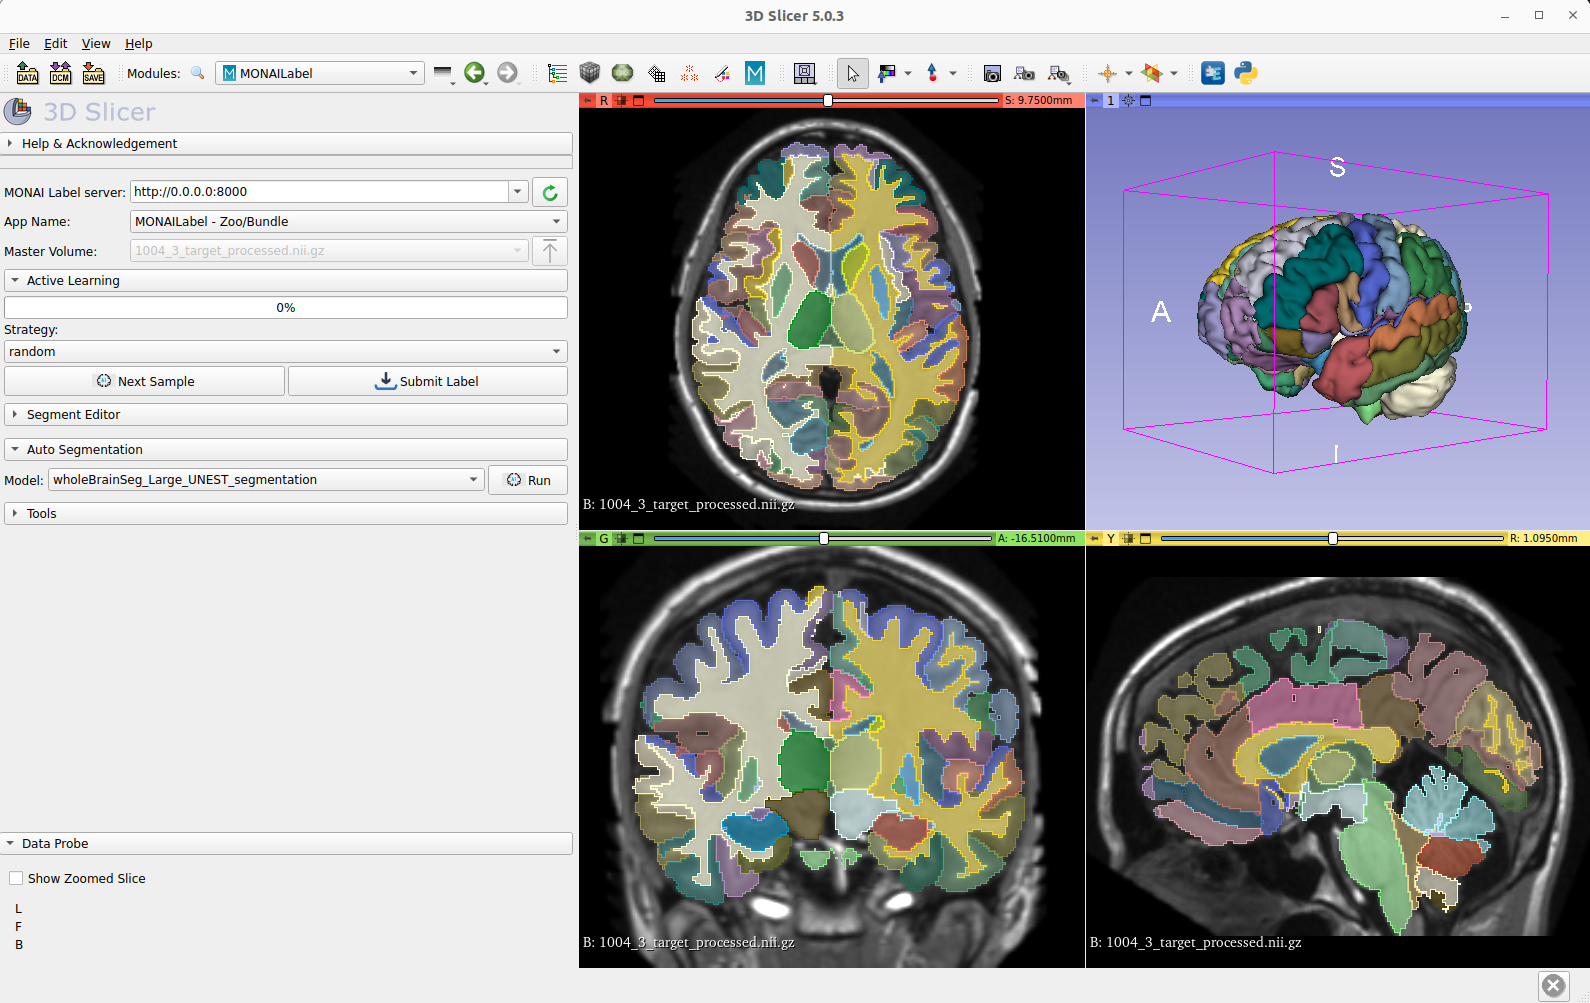 3D Slicer user interface showing segmentation of anatomical structures in a brain from multiple angles.